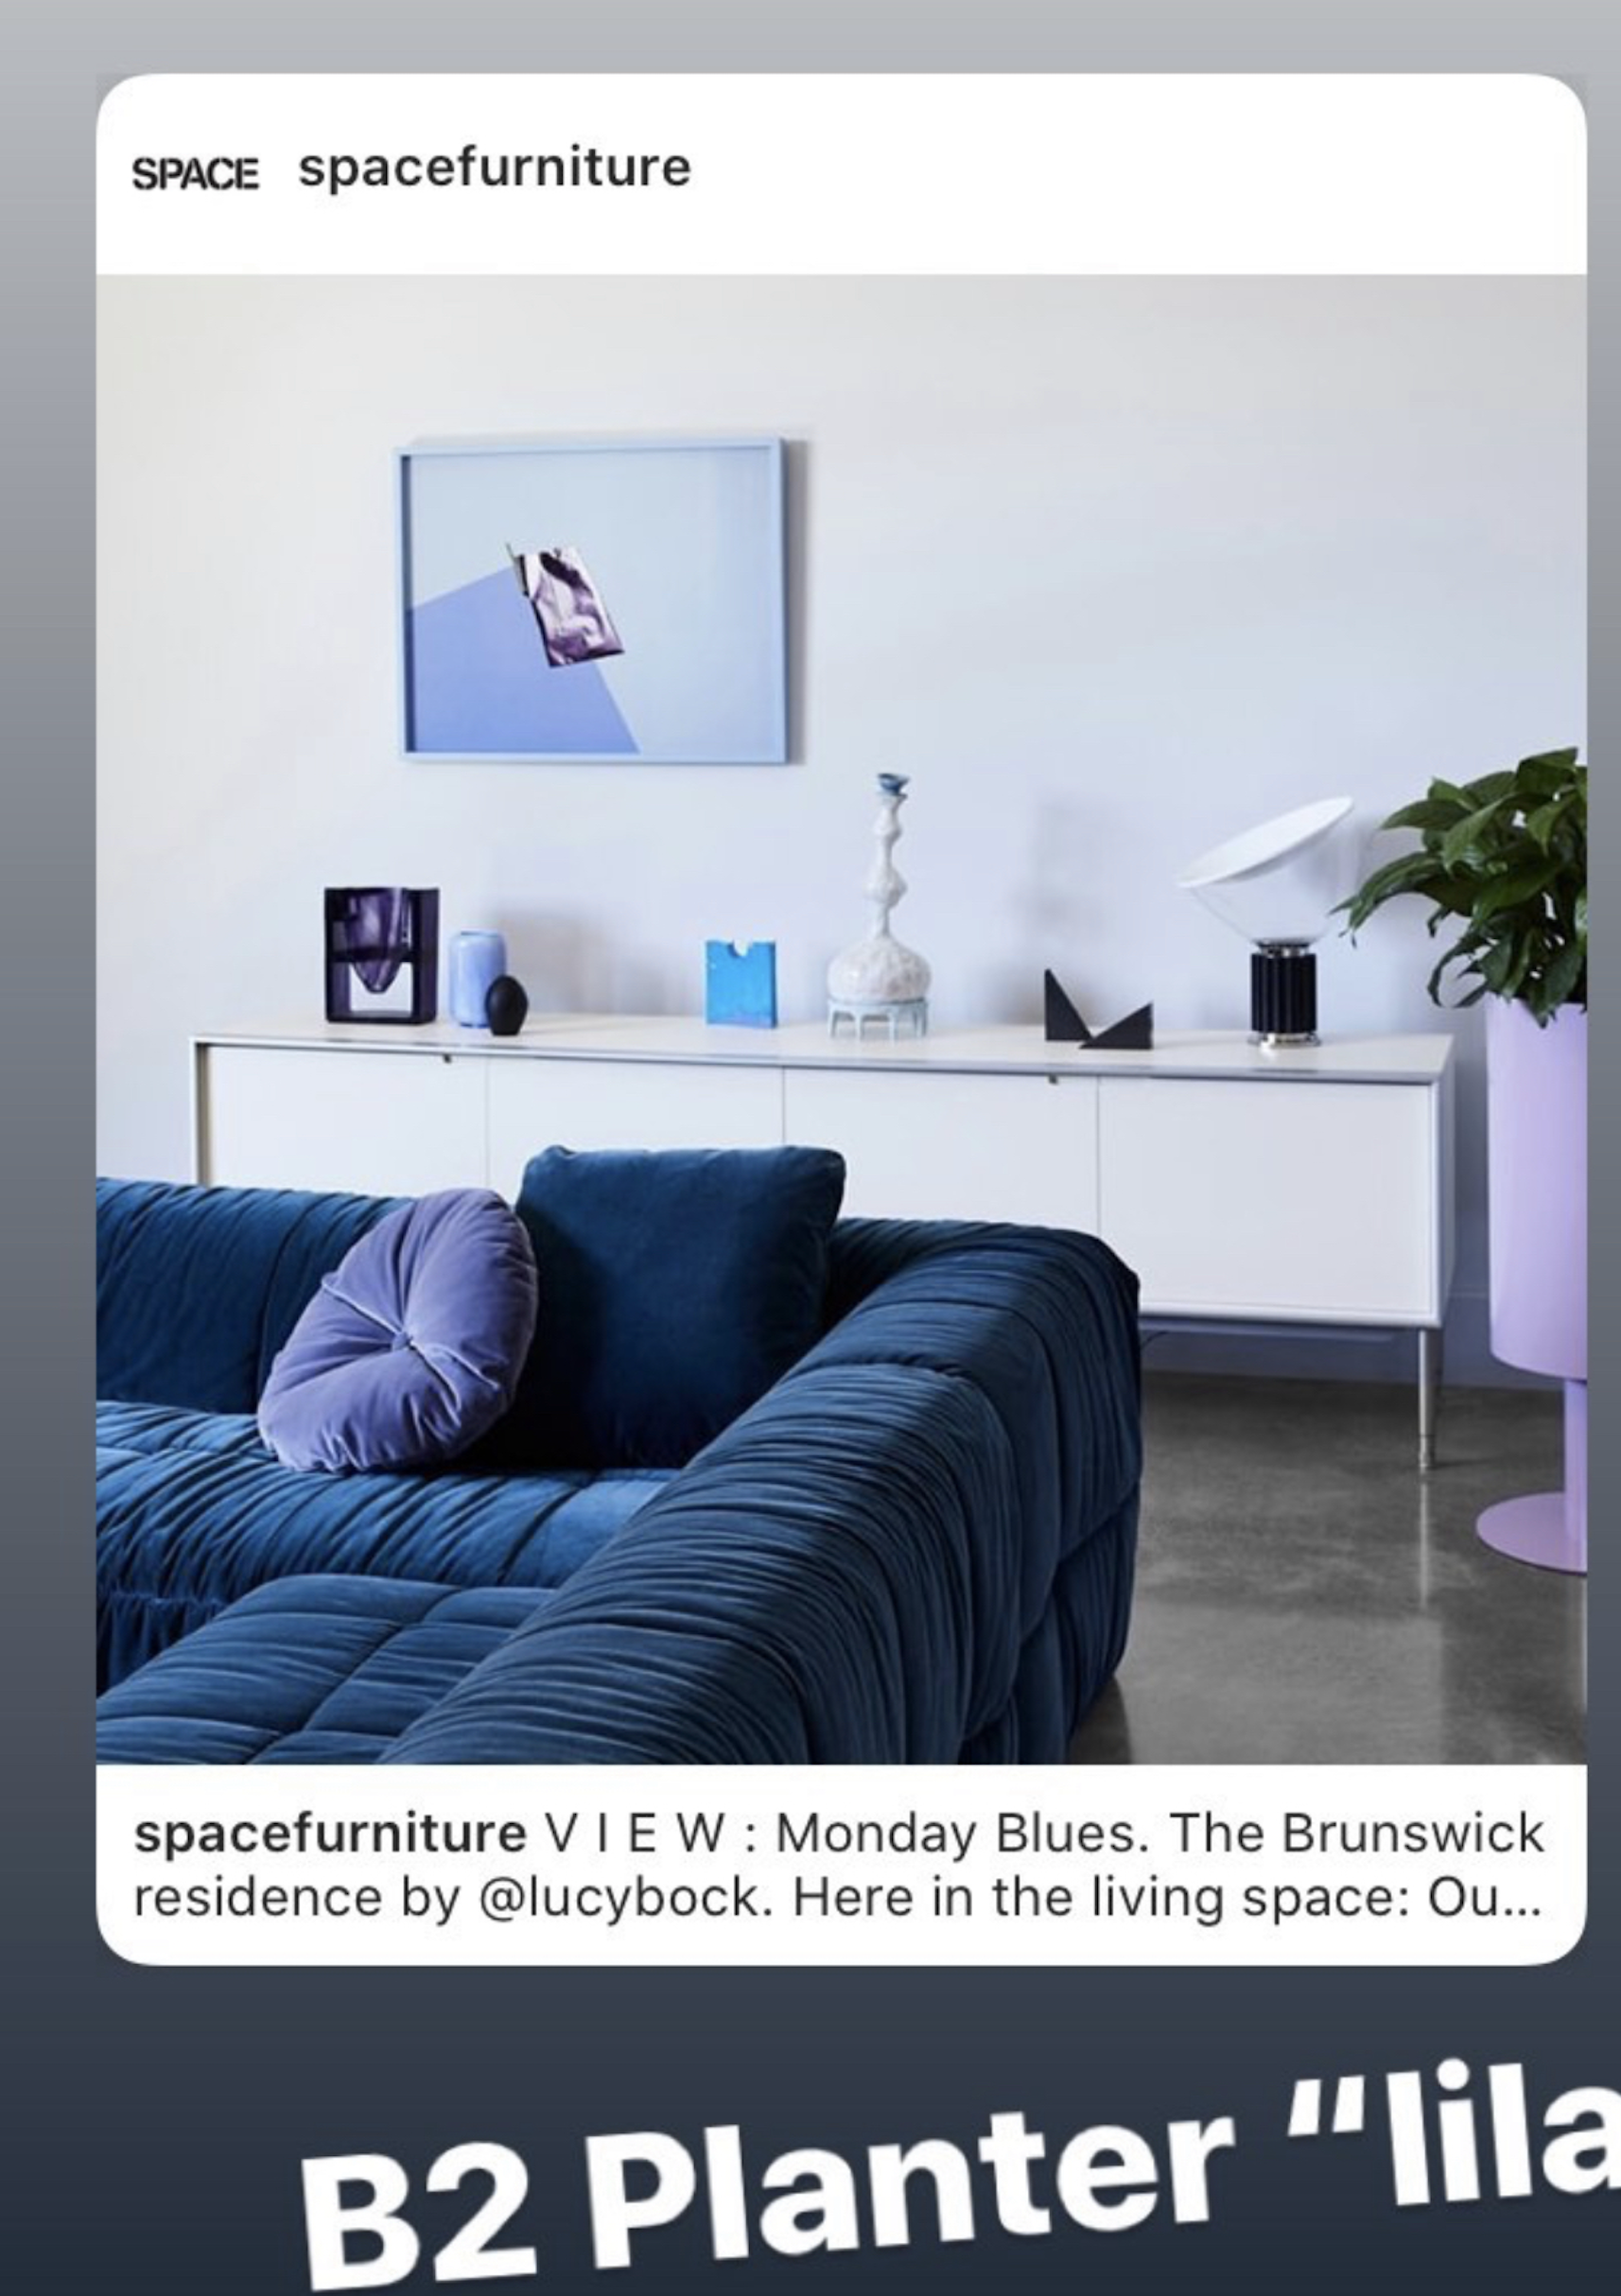 STUDIO-CIAO-SPACEFURNITURE.png